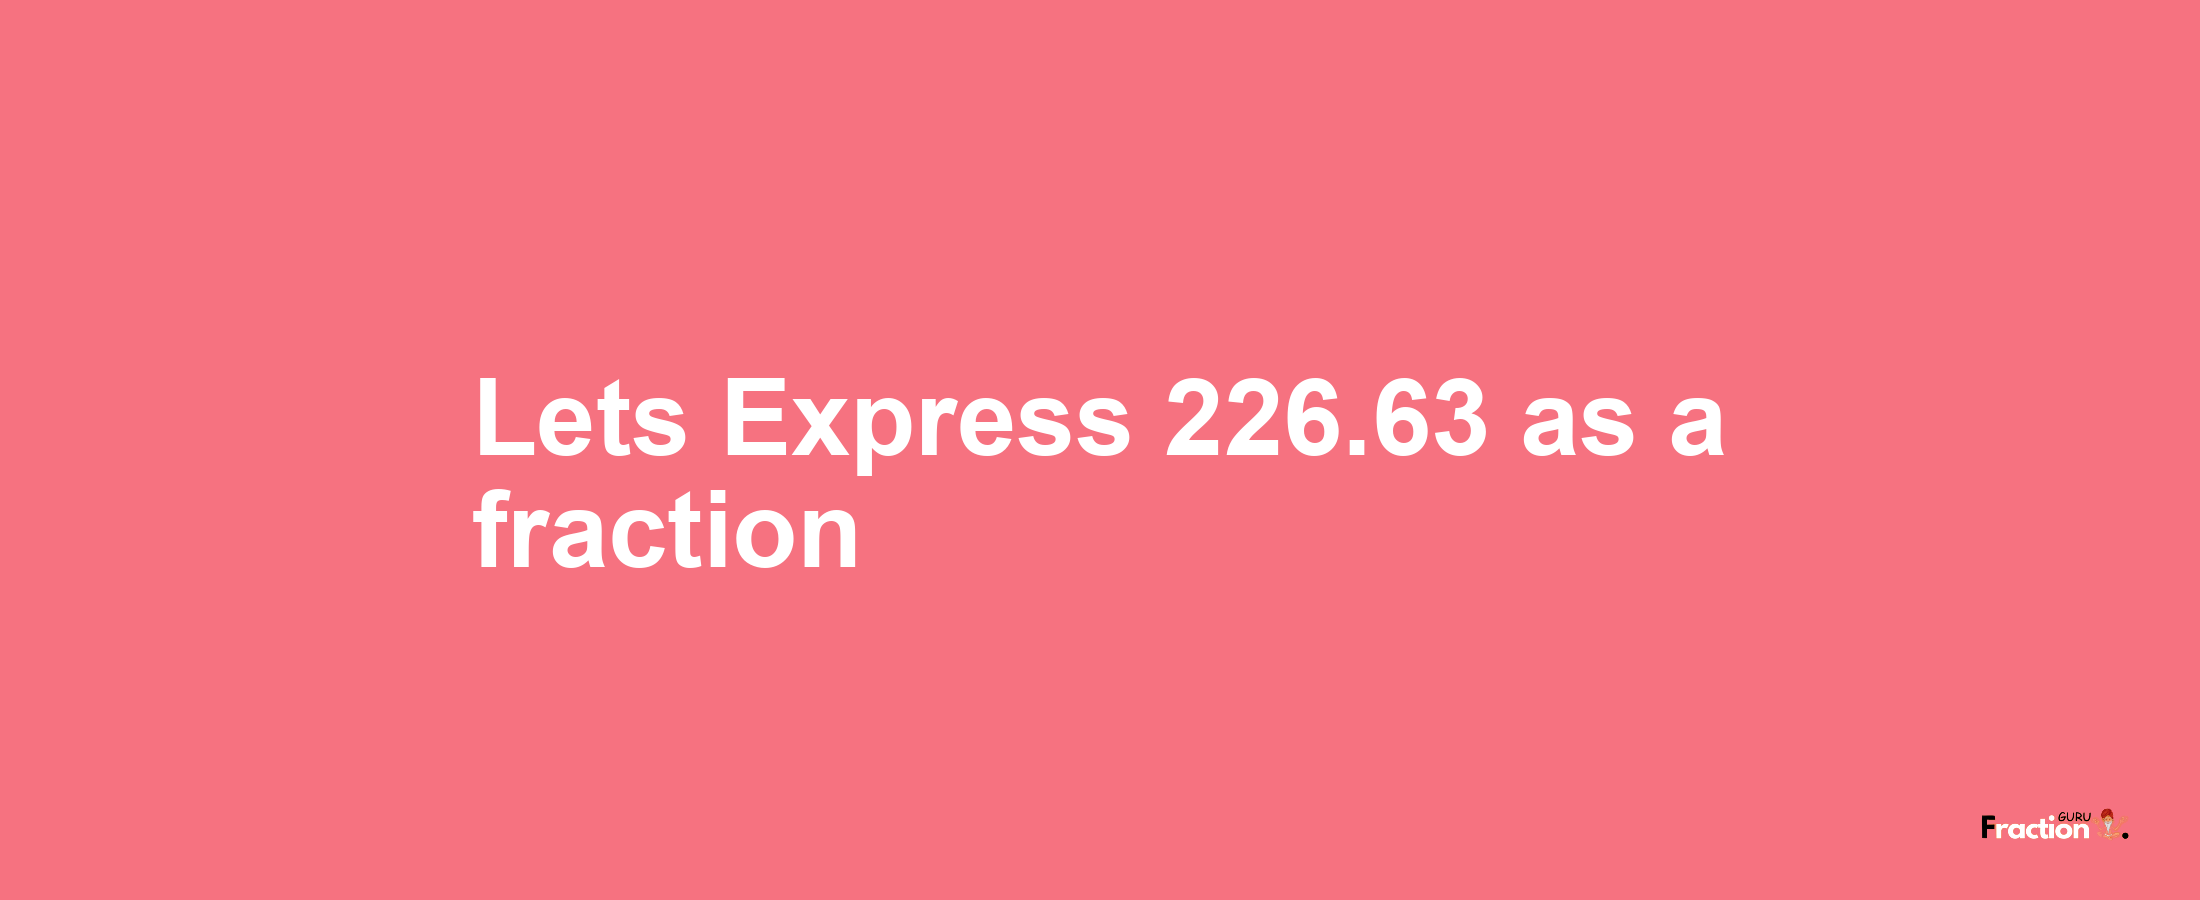 Lets Express 226.63 as afraction